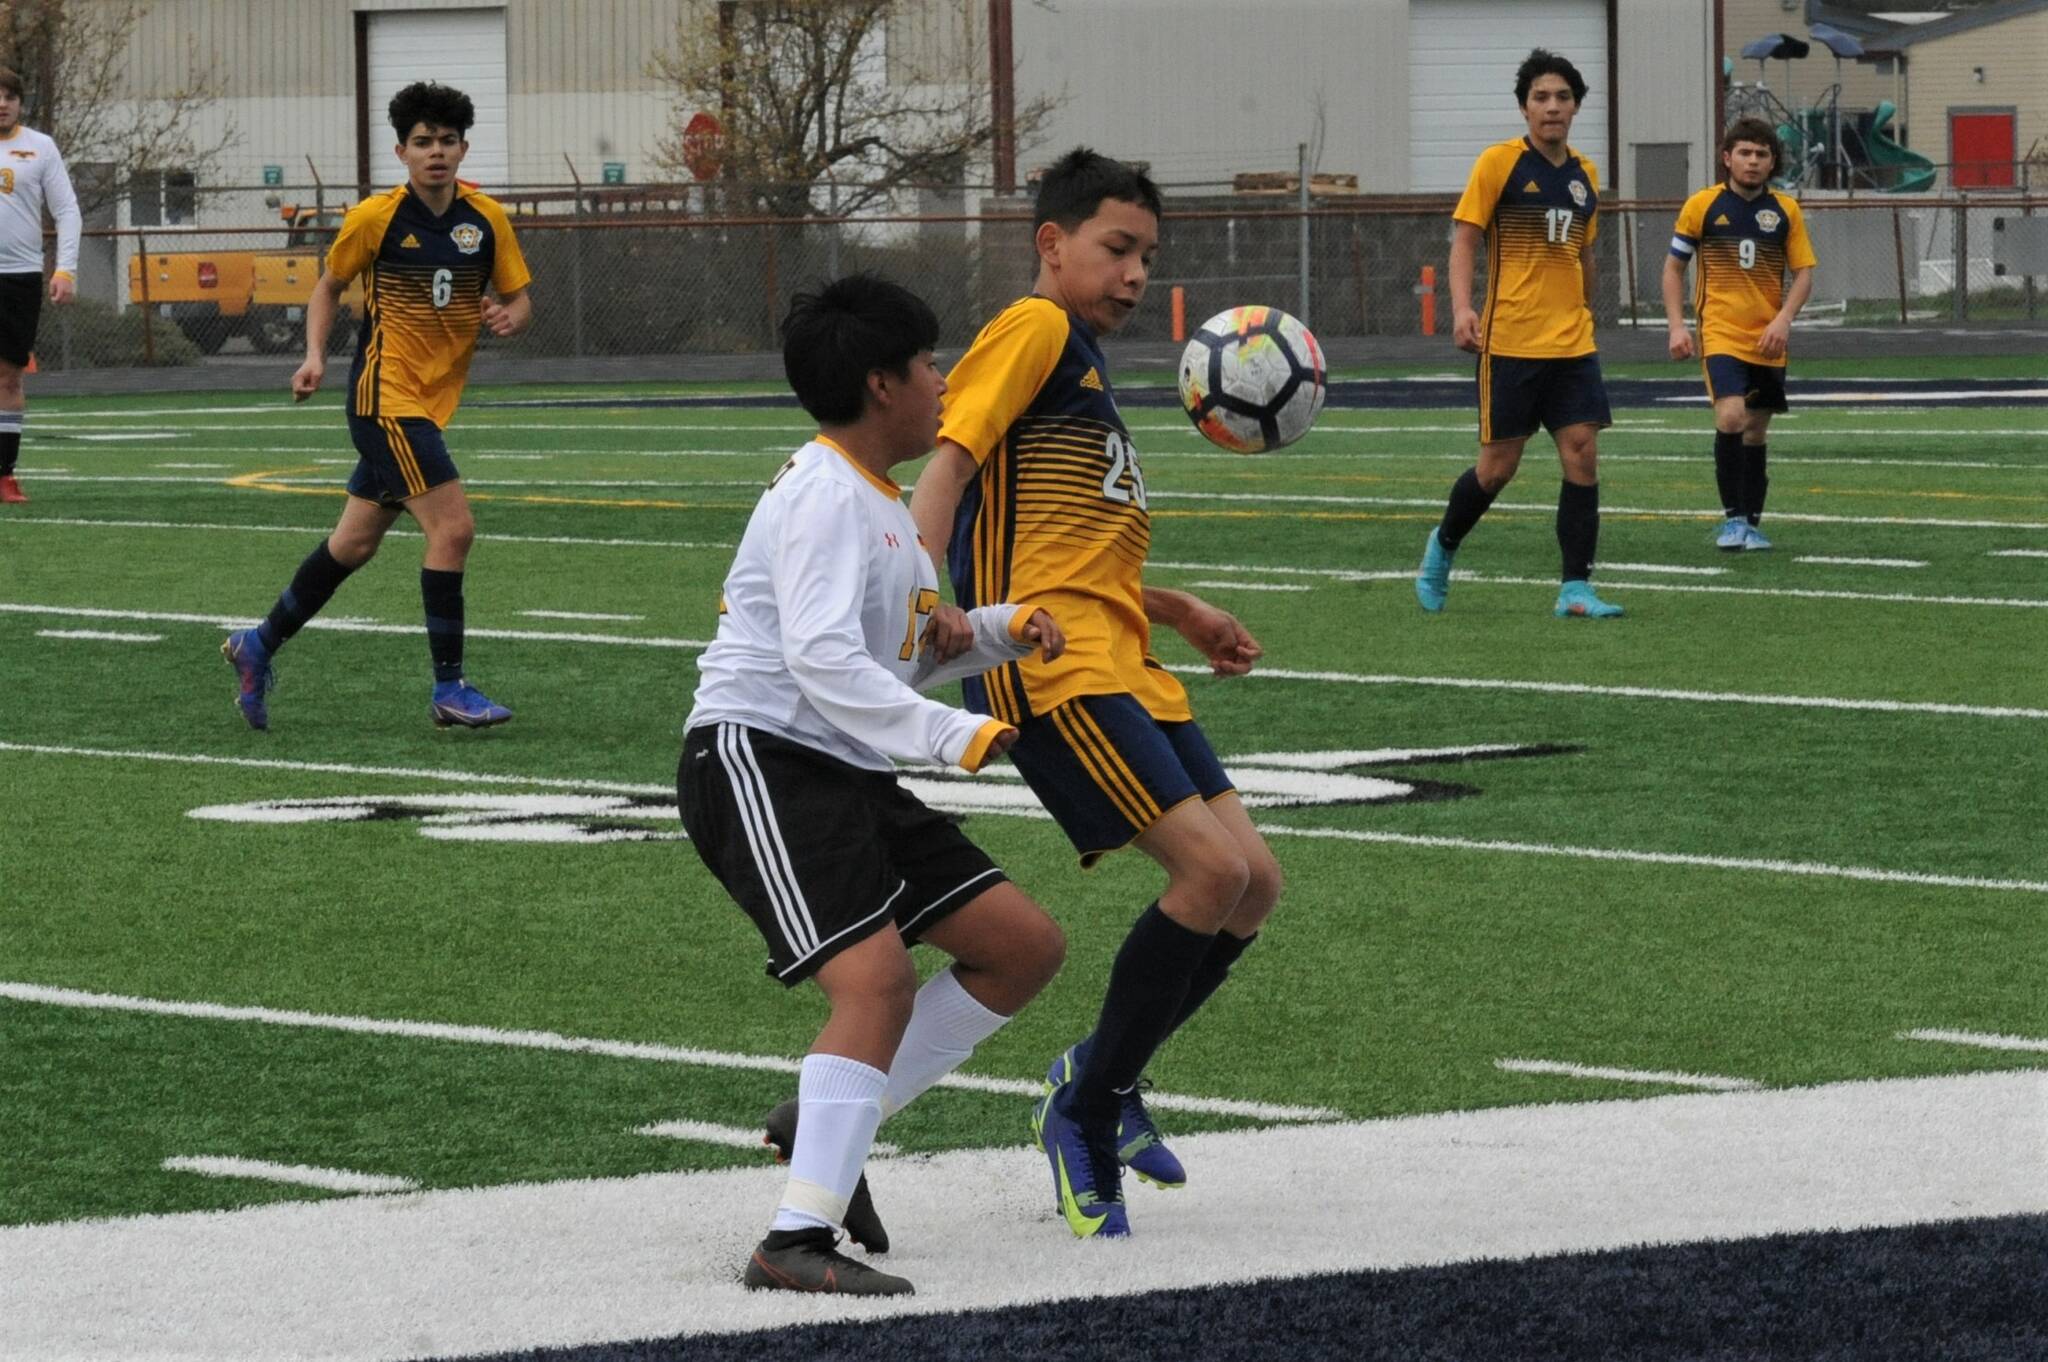 Jorge Diaz-Rodriguez challenges Winlock for ball control. Looking on are Spartans from left, Arturo Gomez, Pedro Ayala and Juan Contreras.